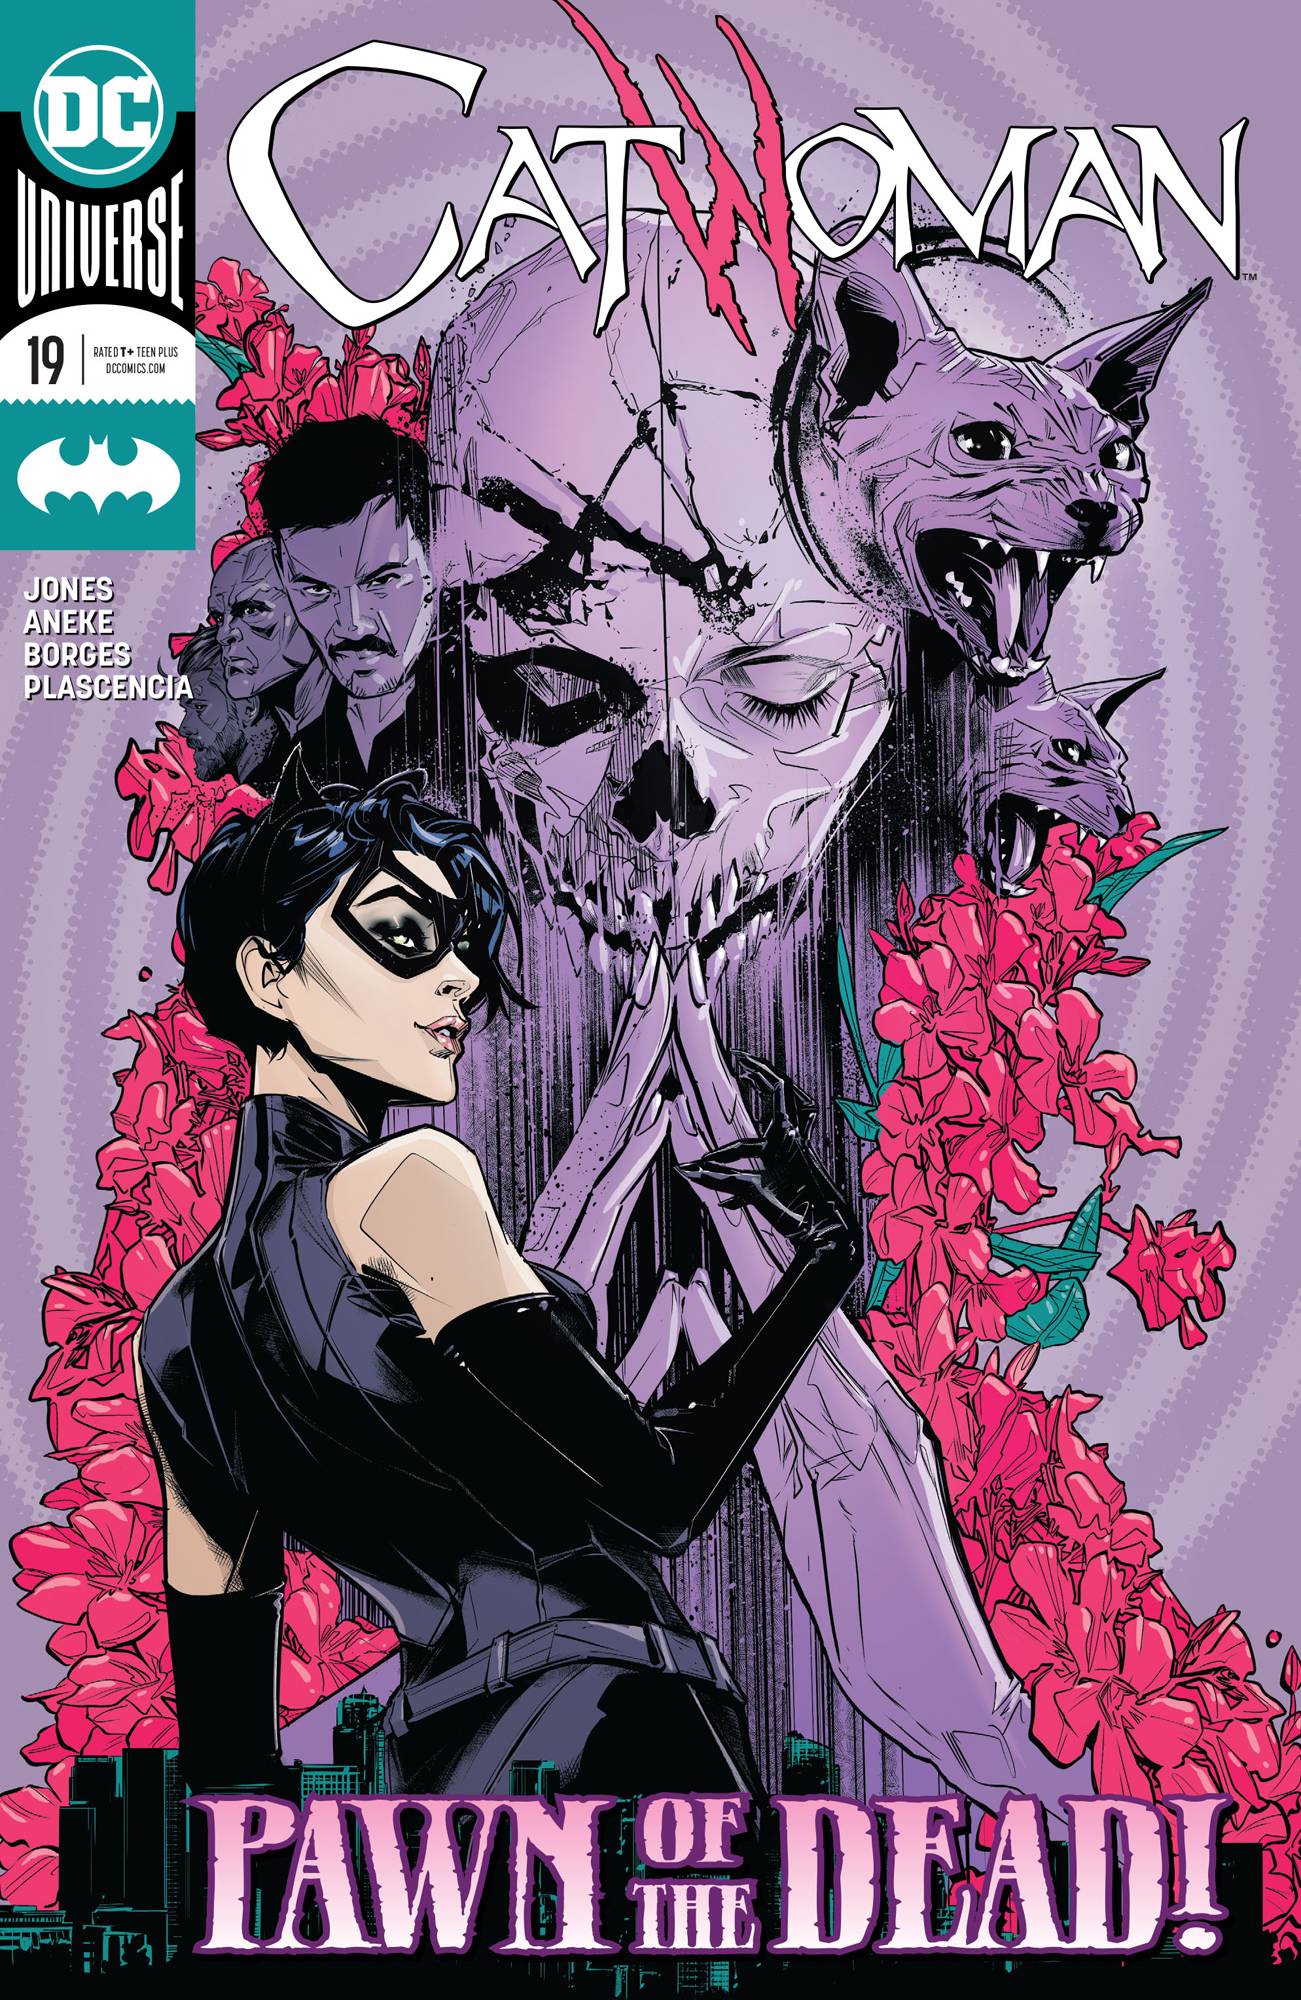 CATWOMAN #19